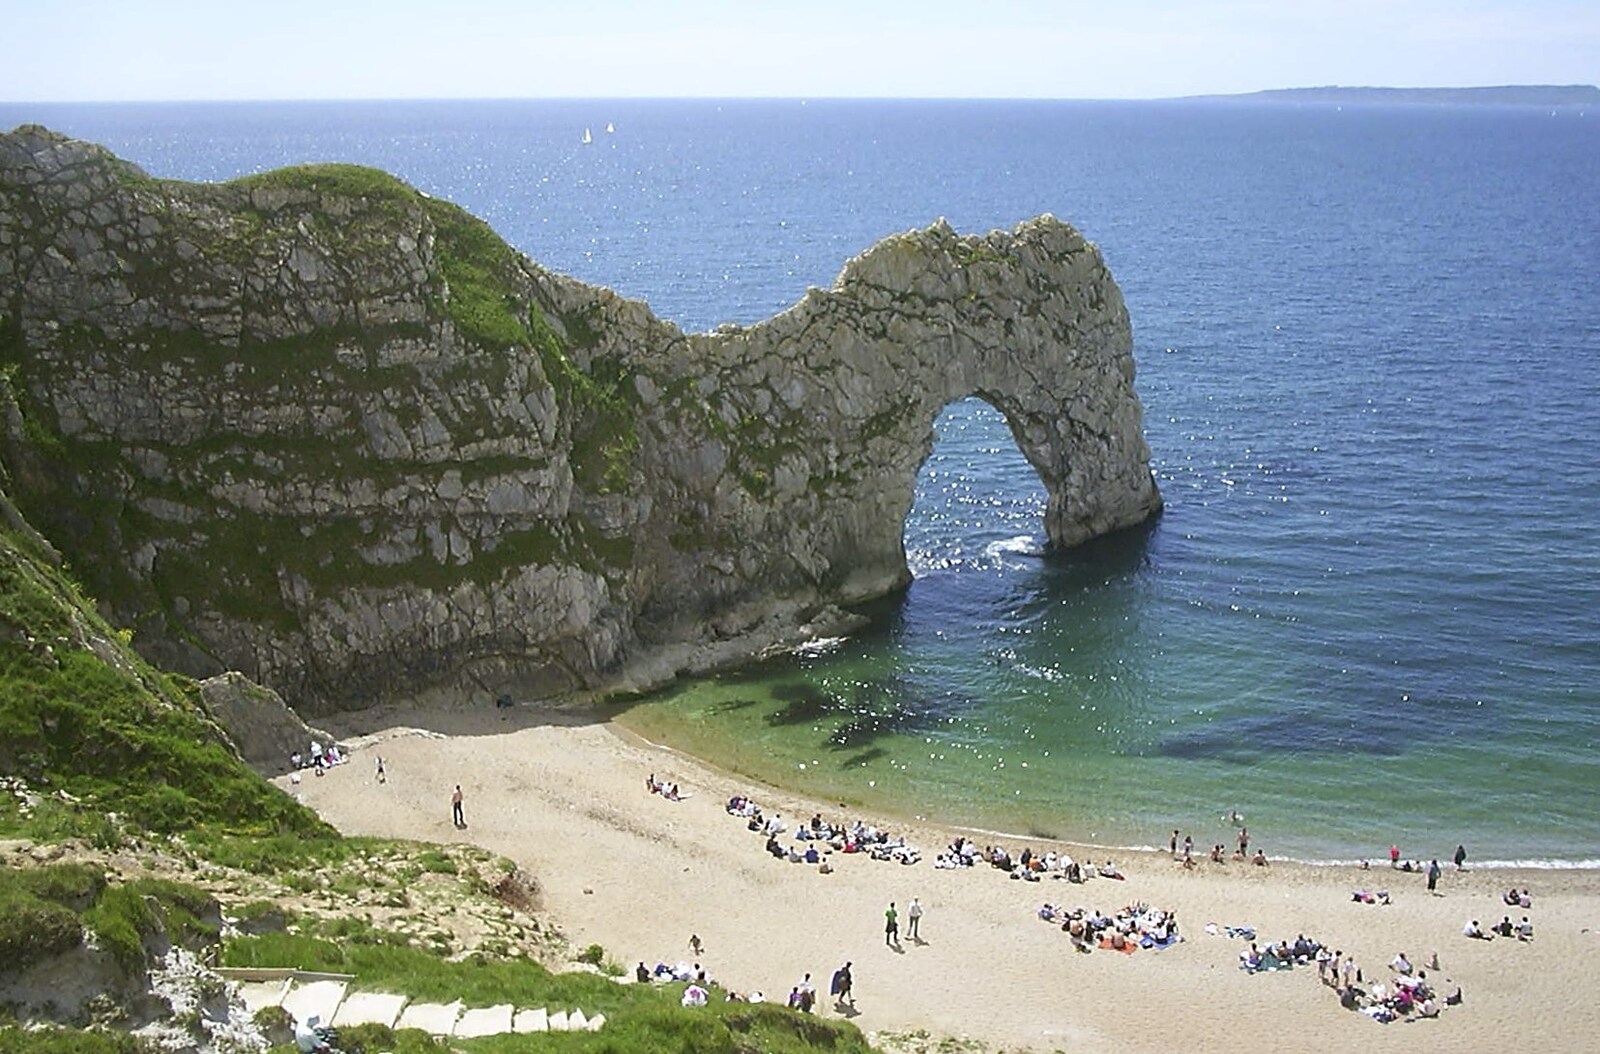 Corfe Castle Camping, Corfe, Dorset - 30th May 2004: The famous Durdle Door